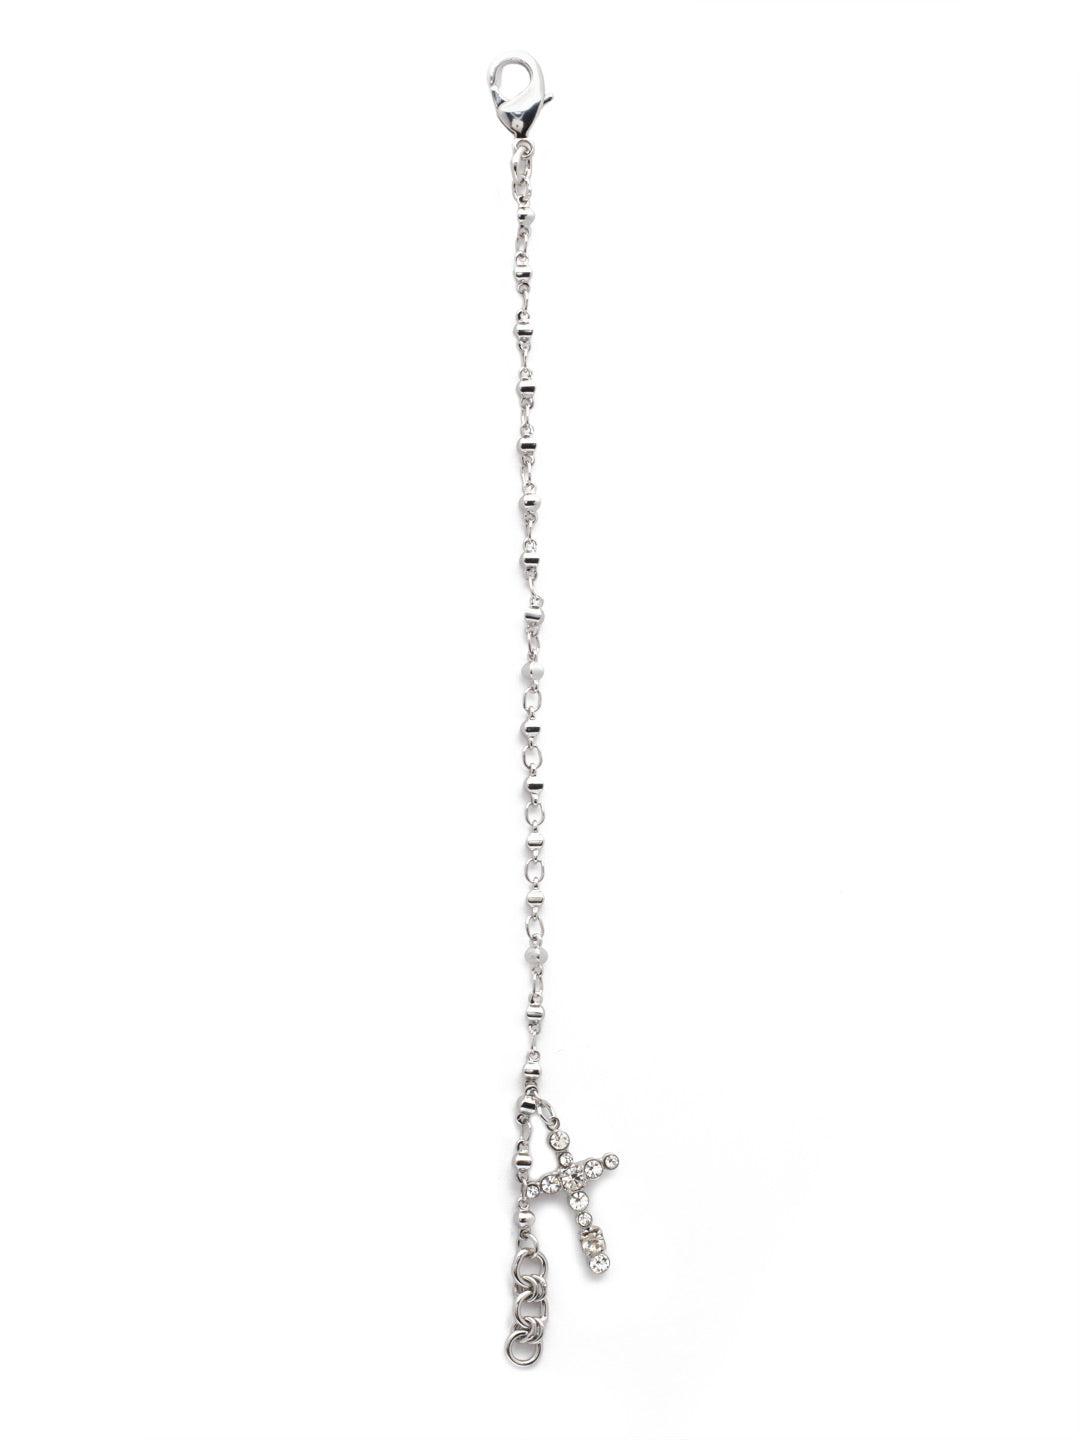 Miley Cross Charm Bracelet - BEX2PDCRY - The Miley Cross Charm Bracelet features a crystal cross charm on a decorative link chain, perfect for wearing alone or layered with other bracelets. From Sorrelli's Crystal collection in our Palladium finish.